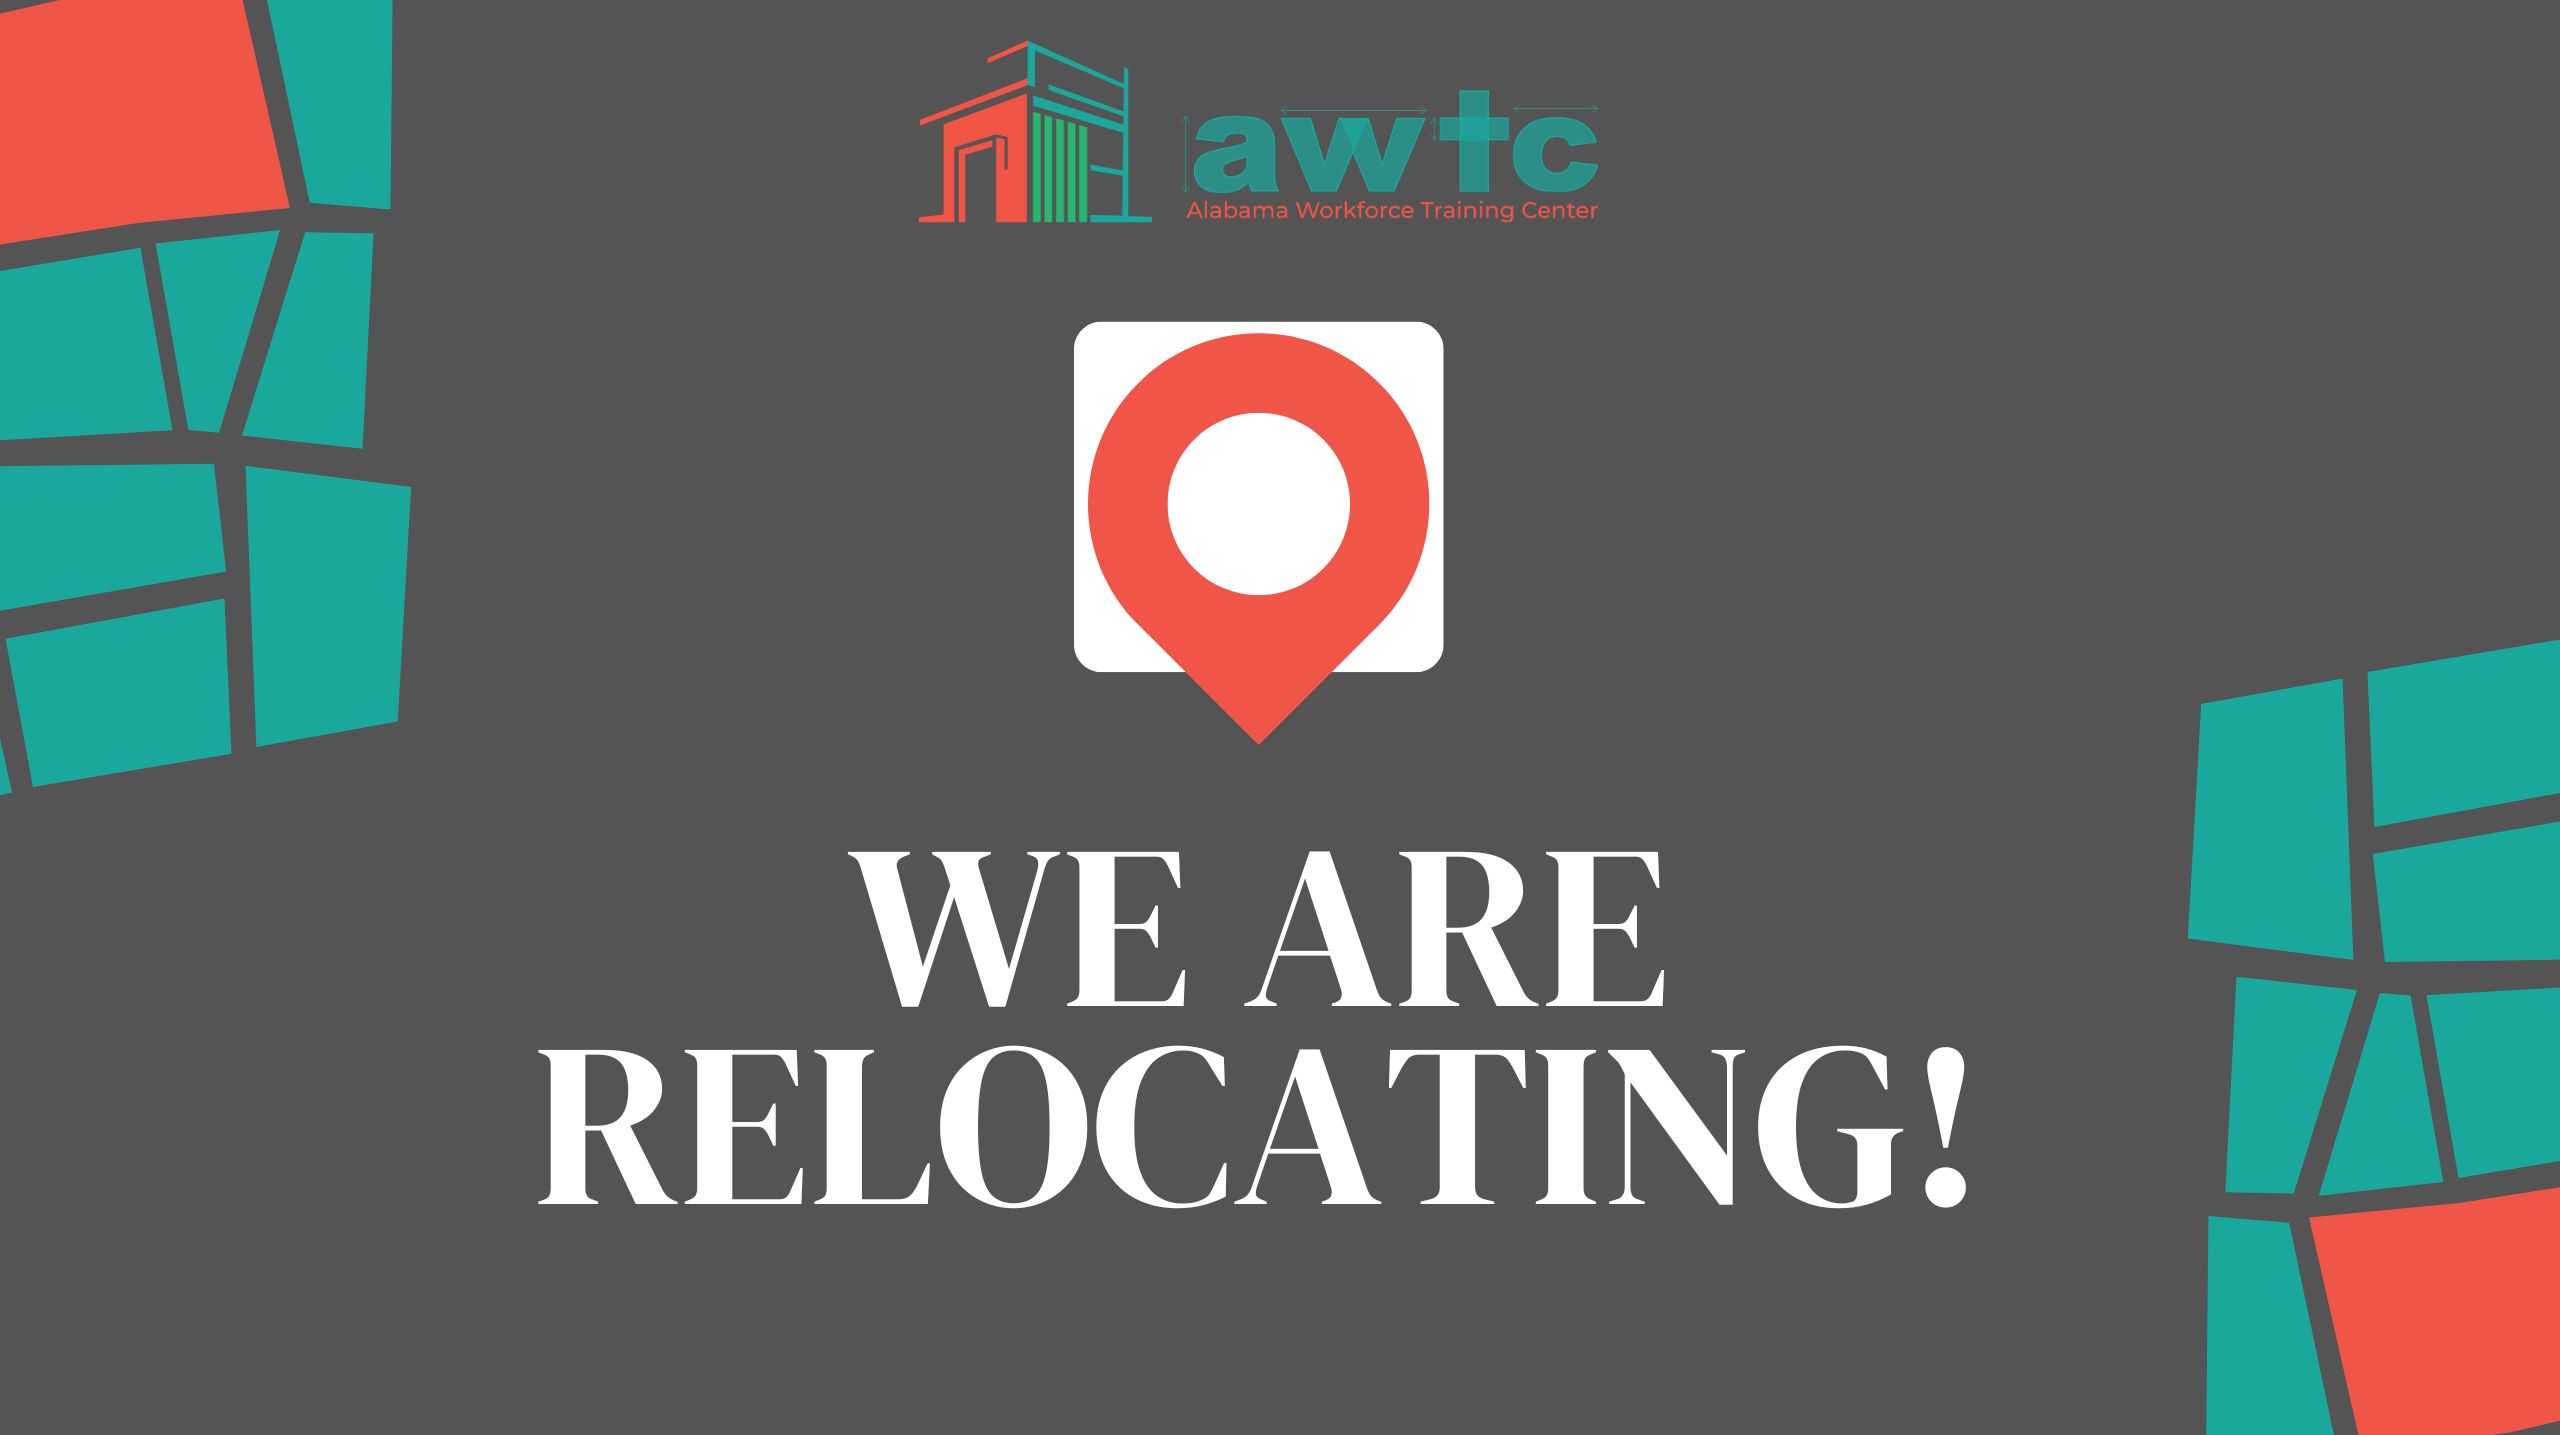 We are relocating image